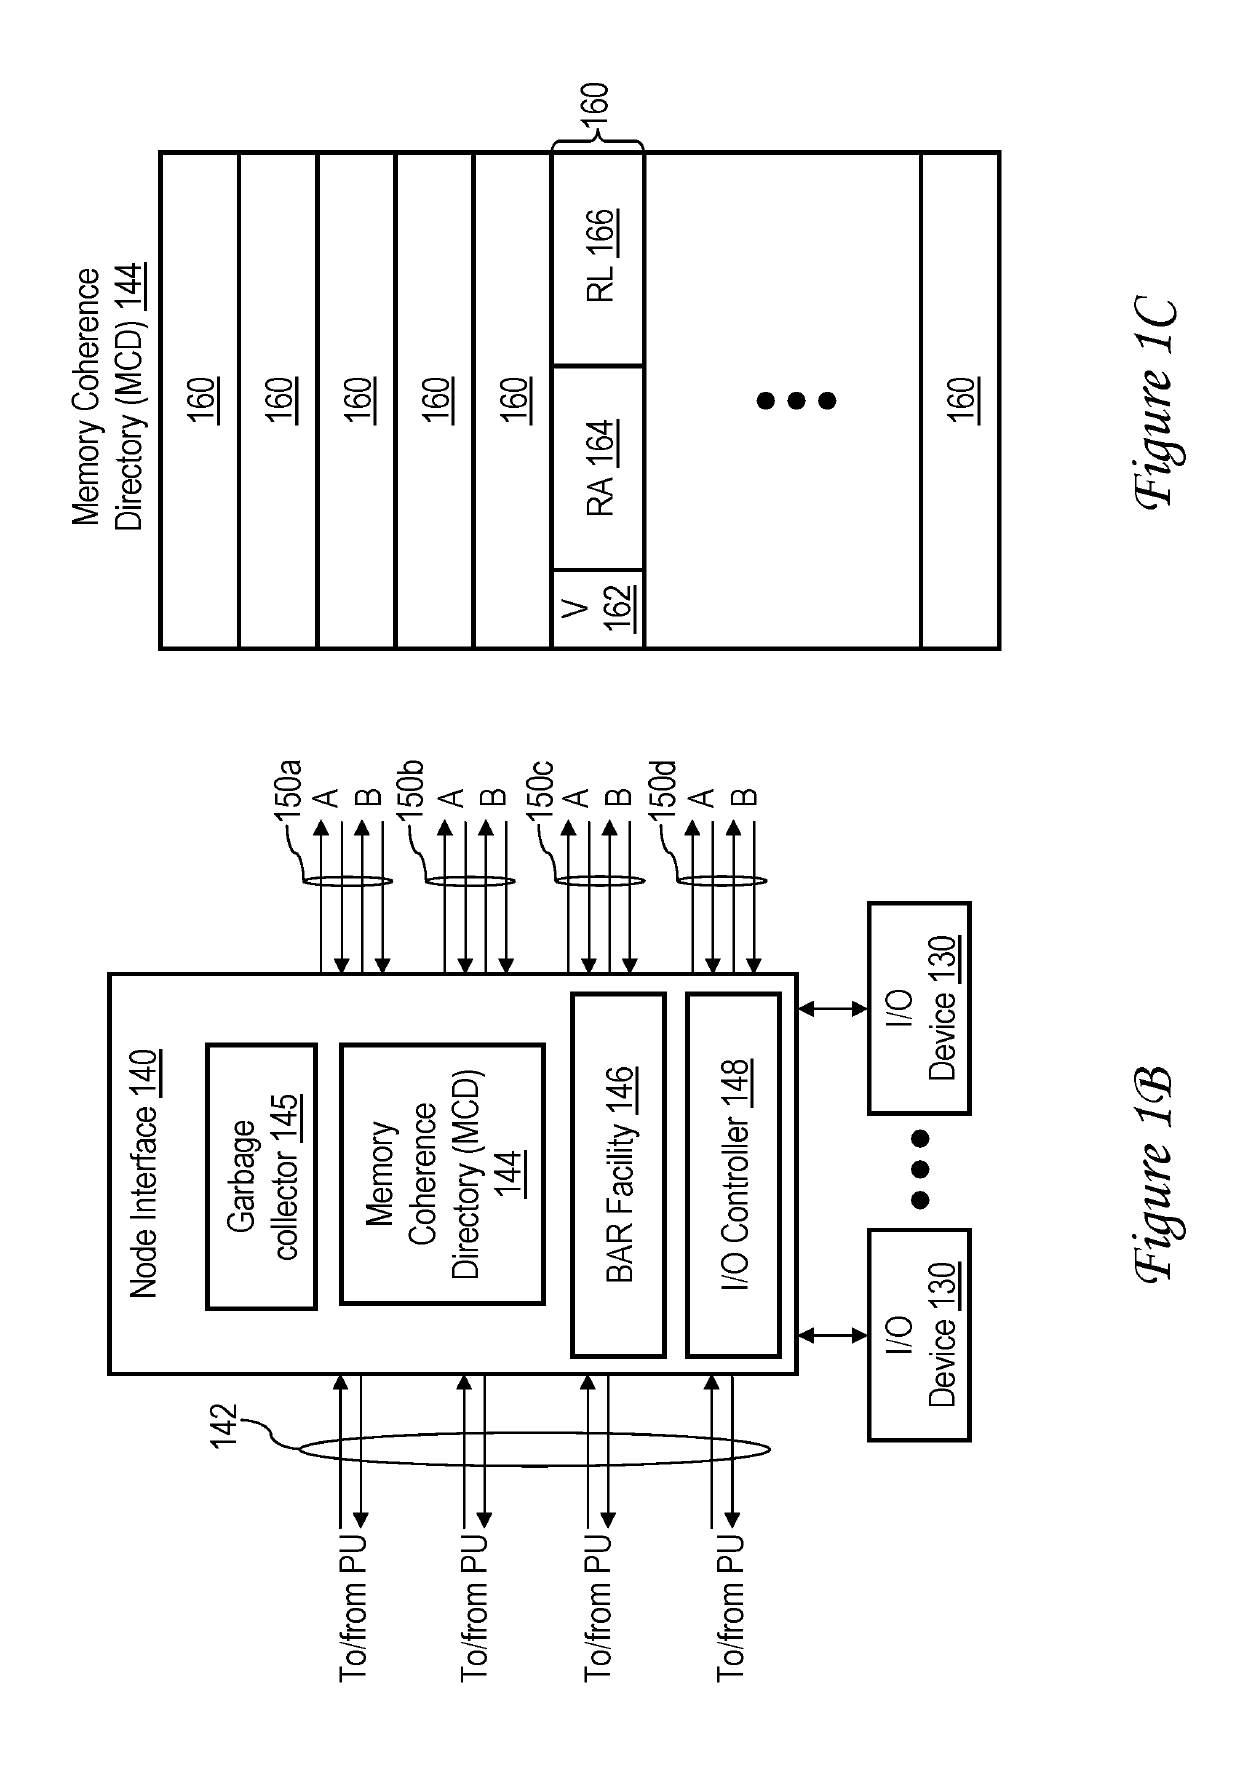 Coherence protocol providing speculative coherence response to directory probe